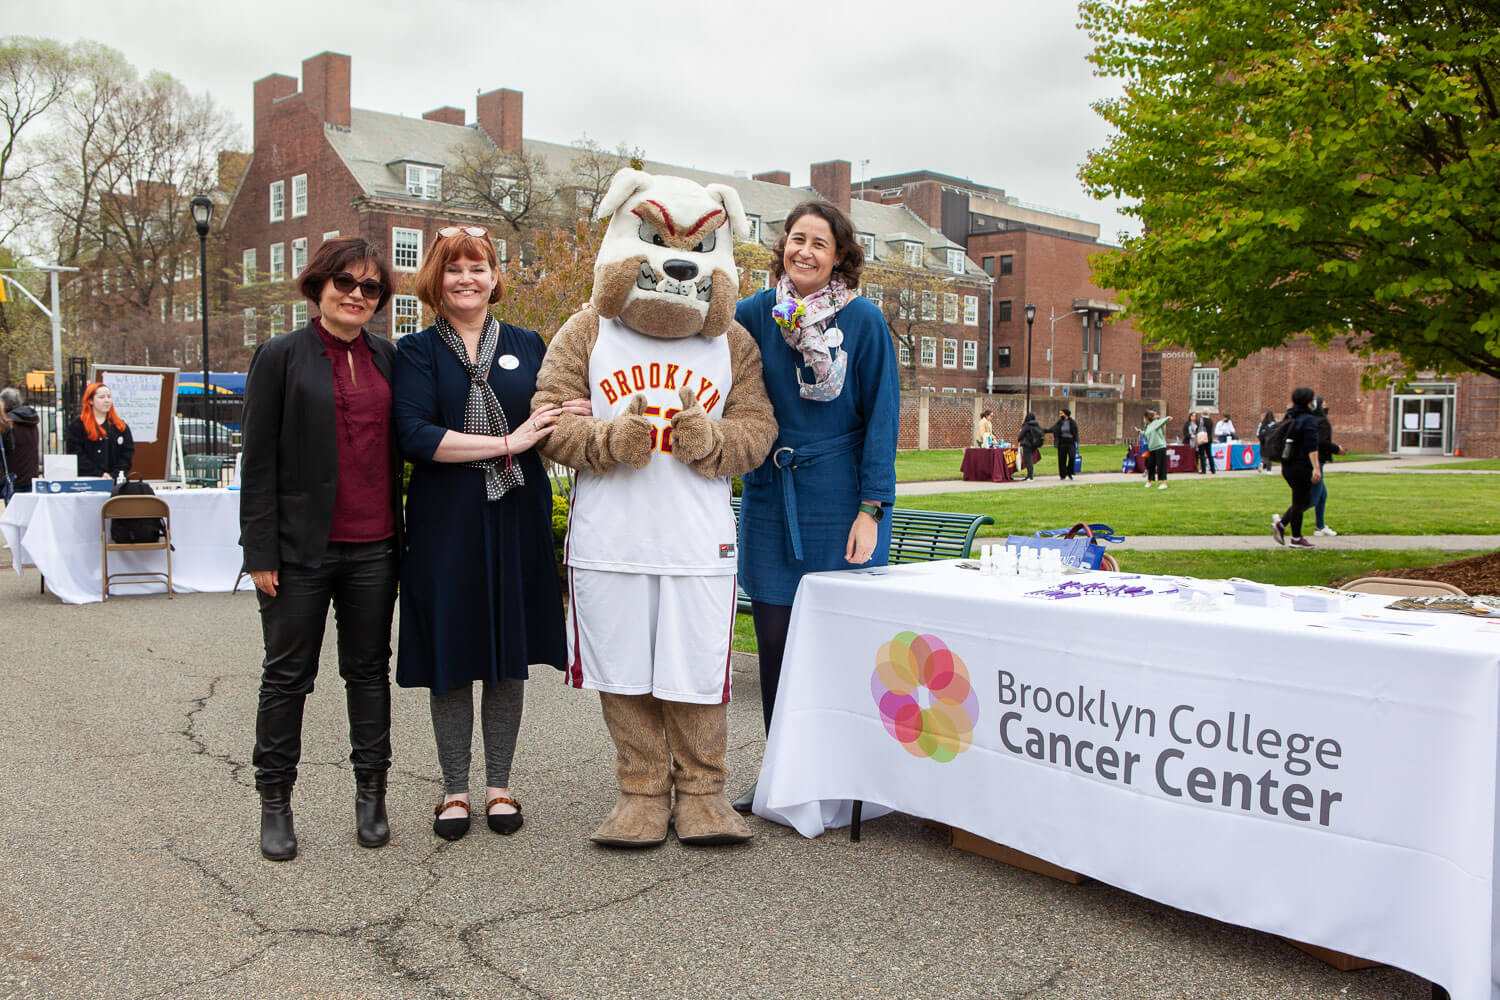 The Brooklyn College Cancer Center held a health and wellness fair in April centered on disease prevention as a tool to support community wellness. Posing with school mascot Buster the Bulldog are (from left to right) Professor Maria Contel, director, BCCC-CURE; Professor Jennifer Basil, associate director of community outreach, BCCC-CURE; and Ana Bartolome, community outreach coordinator and operations manager, BCCC-CURE.